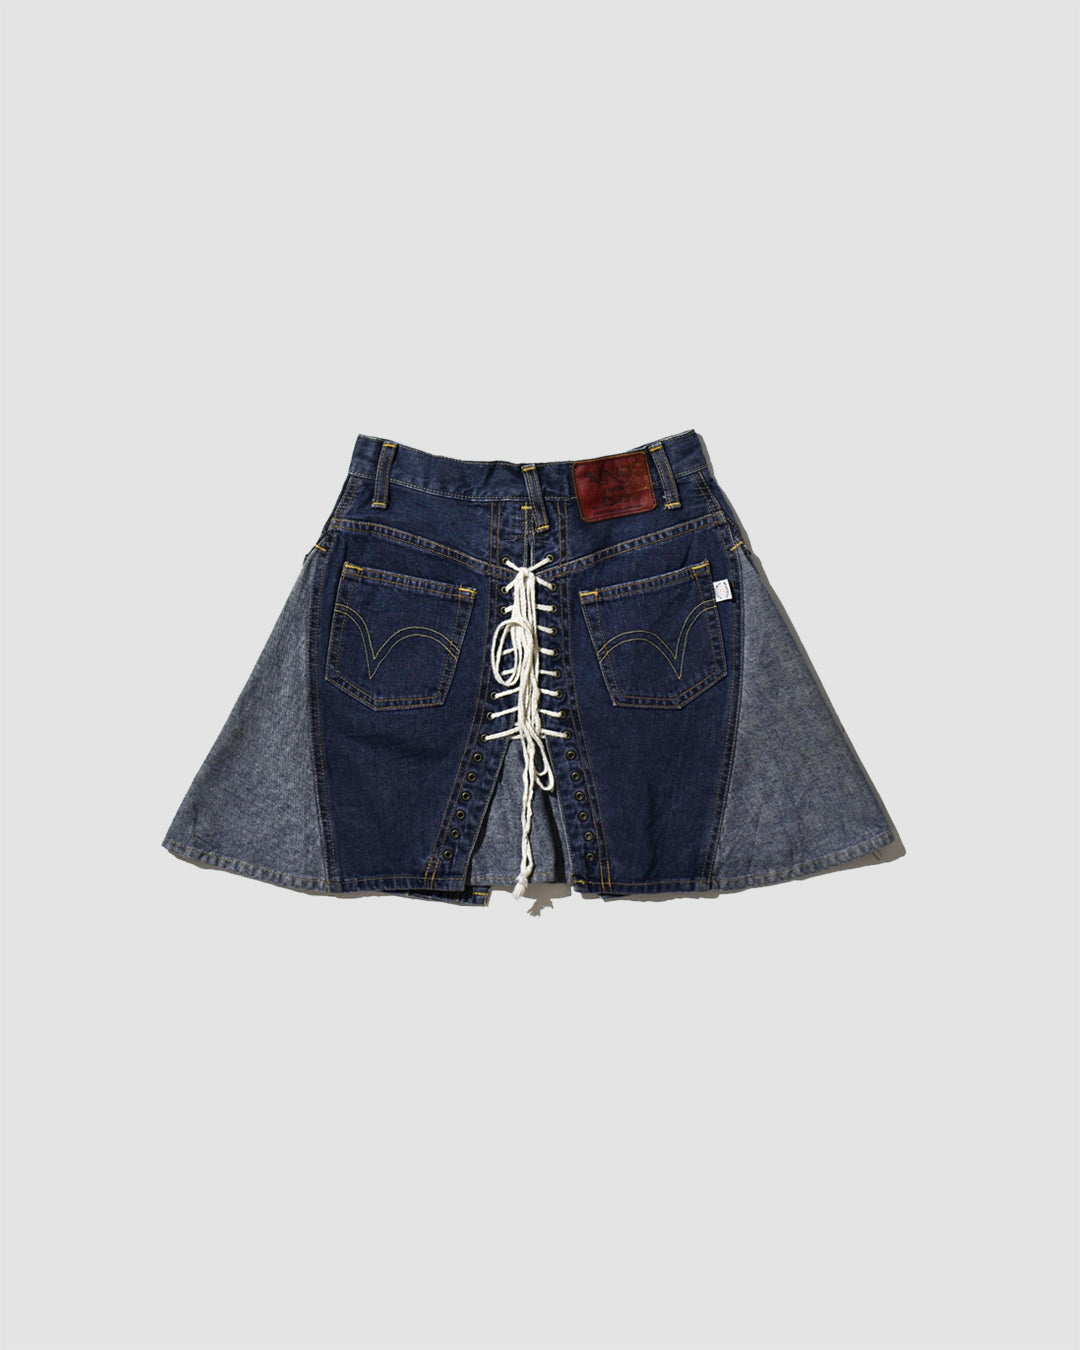 HYSTERIC GLAMOUR KINKY LACE UP DENIM SKIRT - 25